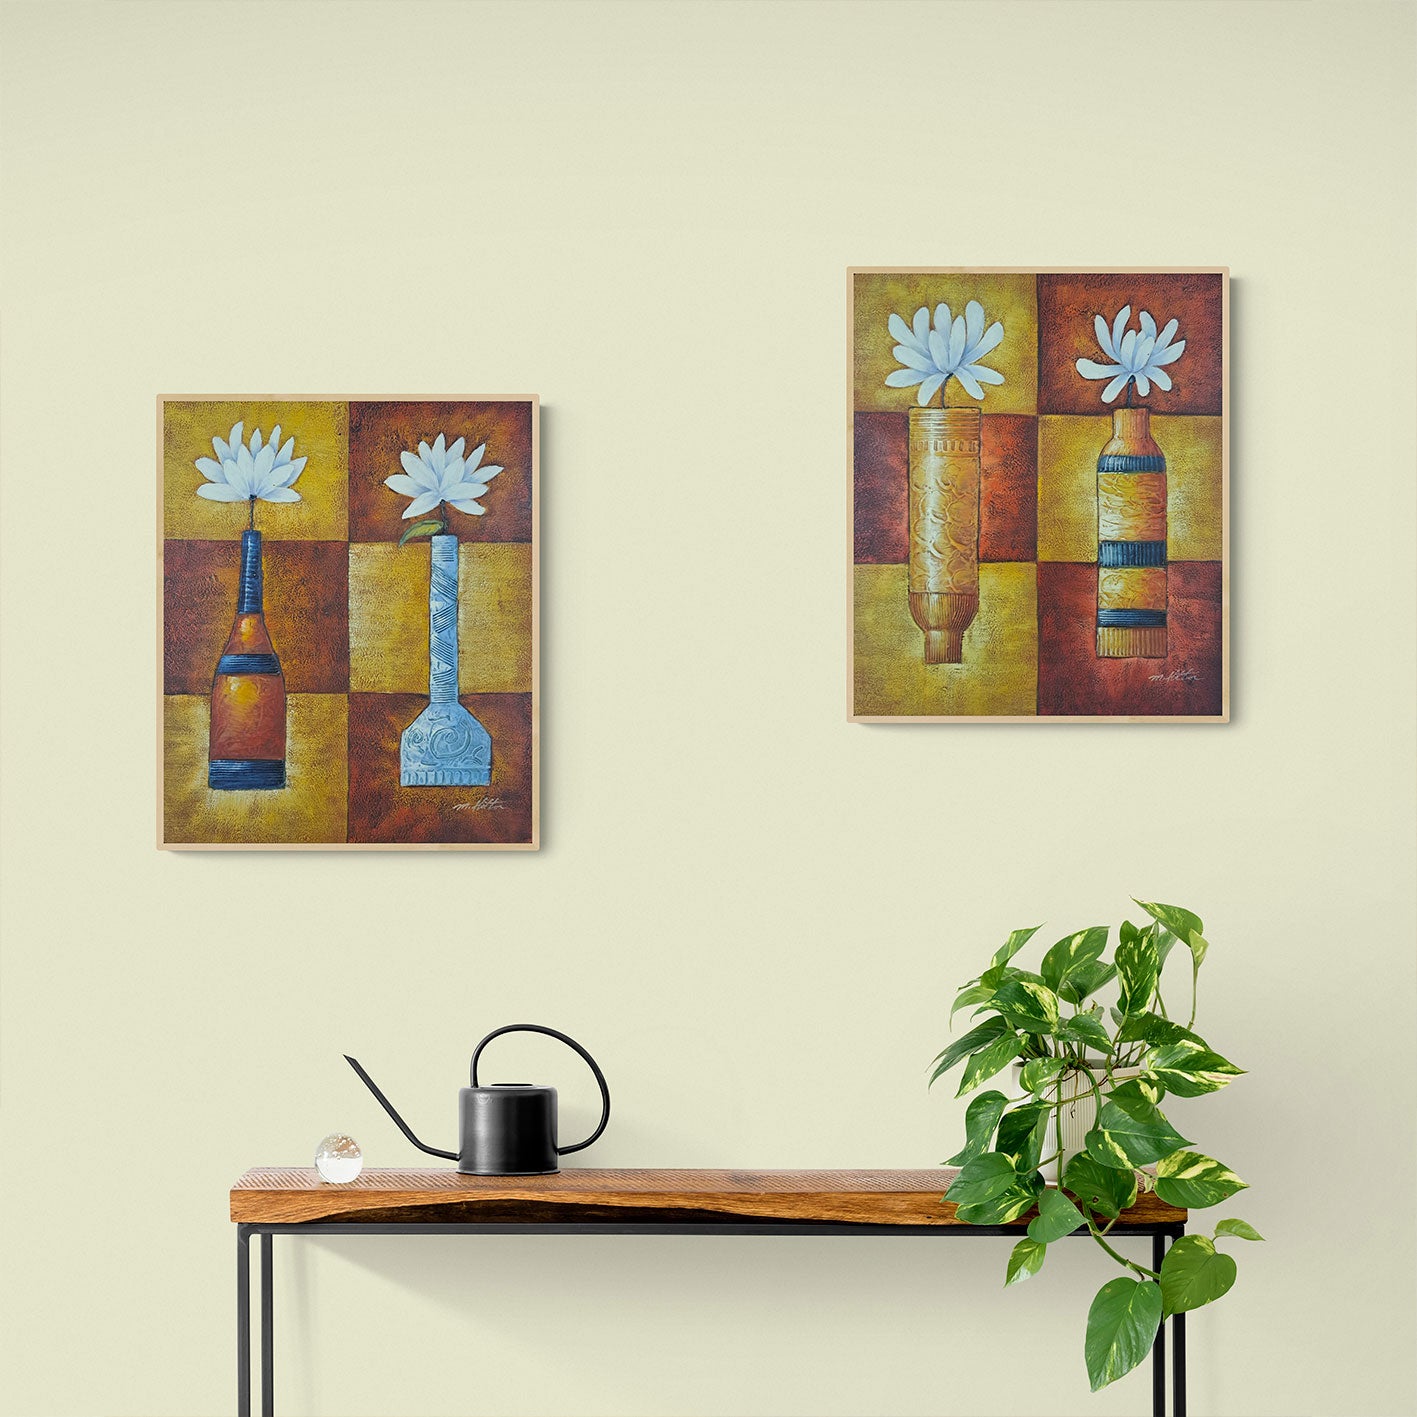 Diptych Relief Painting Vases 50X60 cm [2 pieces]